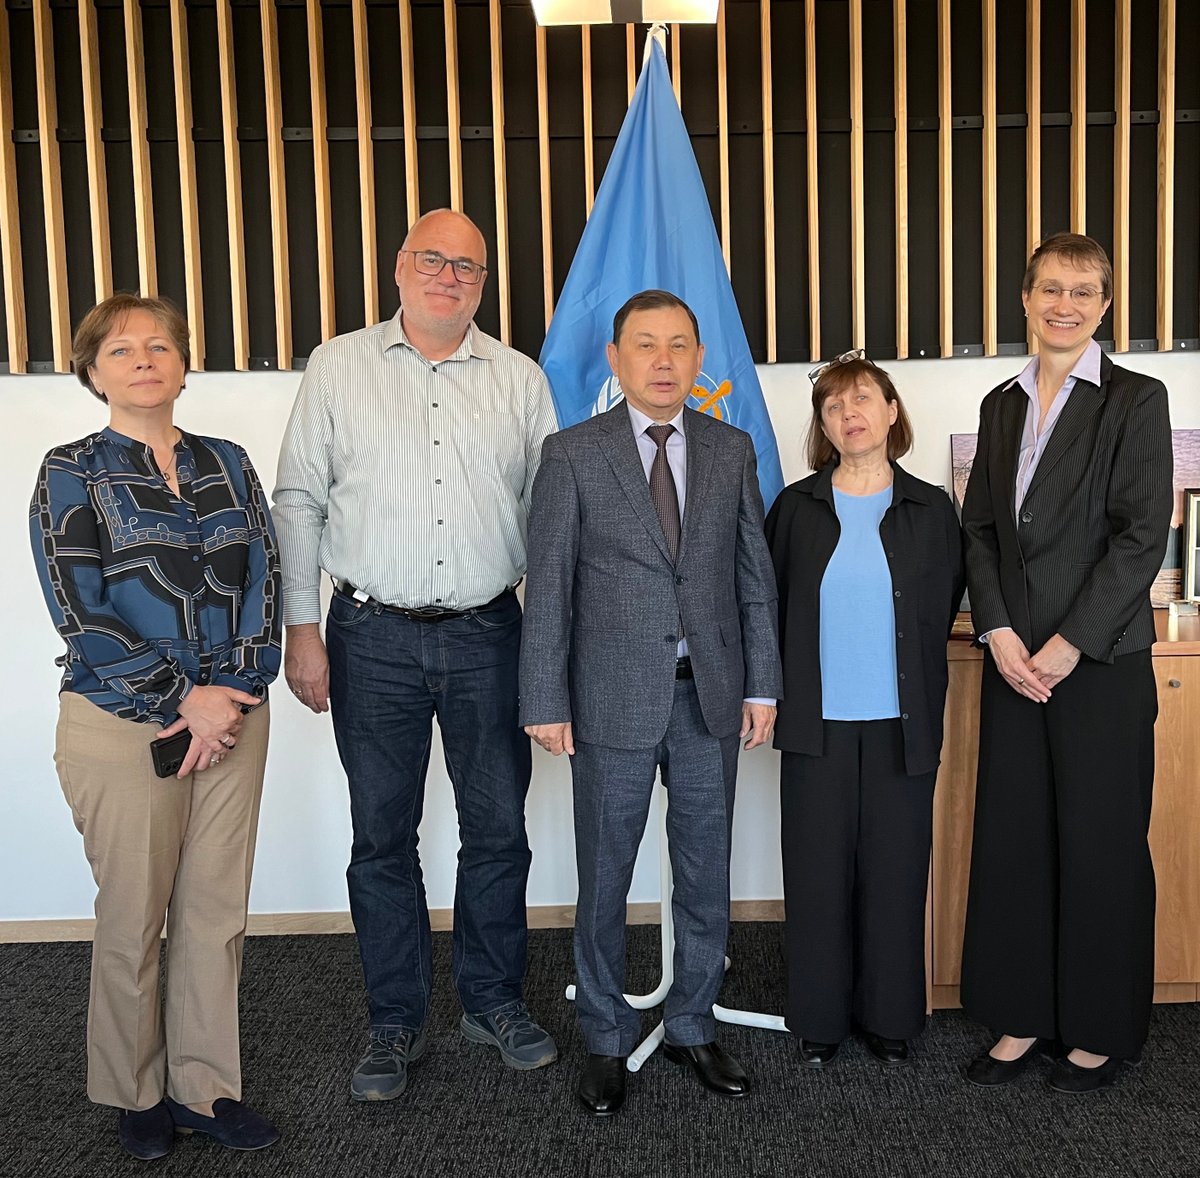 Visit from Scientific Research Institute of #Radiation Medicine & Ecology (NIIRME) of Semey Medical University, 🇰🇿, to discuss joint epidemiological studies of radiation & #cancer in the region of the former Soviet Union nuclear test site☢️ (Polygon).